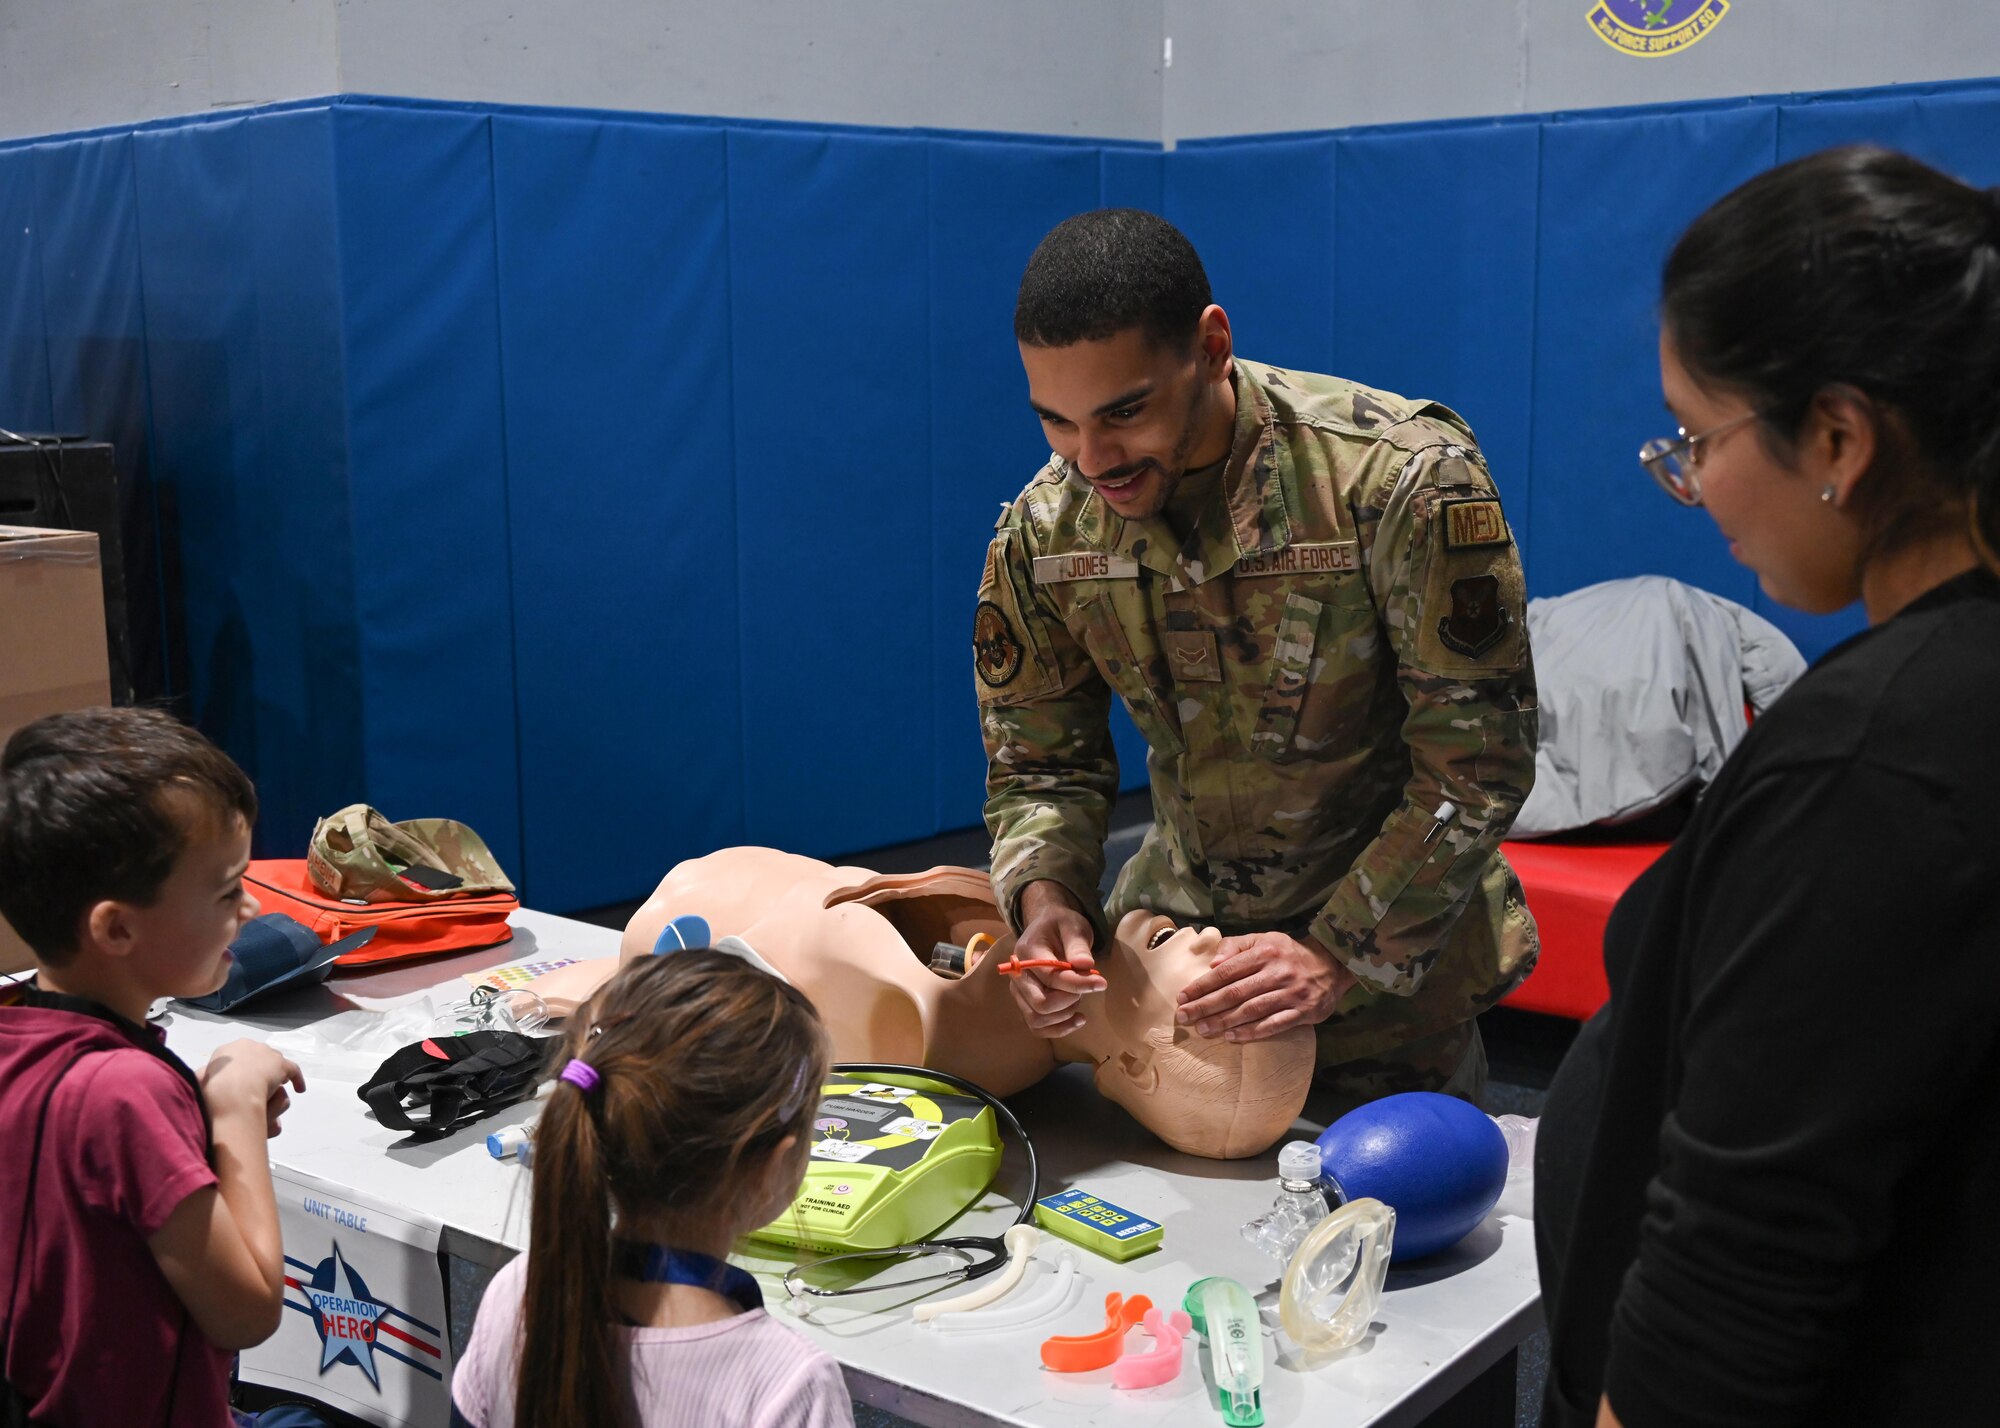 U.S. Air Force Airman First Class Easton Jones, 5th Healthcare Operations Squadron 
ambulance service medical technician, teaches kids emergency breathing techniques as part of Operation Hero at the Community Complex Center at Minot Air Force Base, North Dakota, Jan. 20, 2023. Airmen assigned to 20 different agencies from the 5th Bomb Wing and the 91st Missile Wing showcased their duties in an effort to teach families and their children about how many different career paths they can take in their lives. (U.S. Air Force photo by Senior Airman Caleb S. Kimmell)